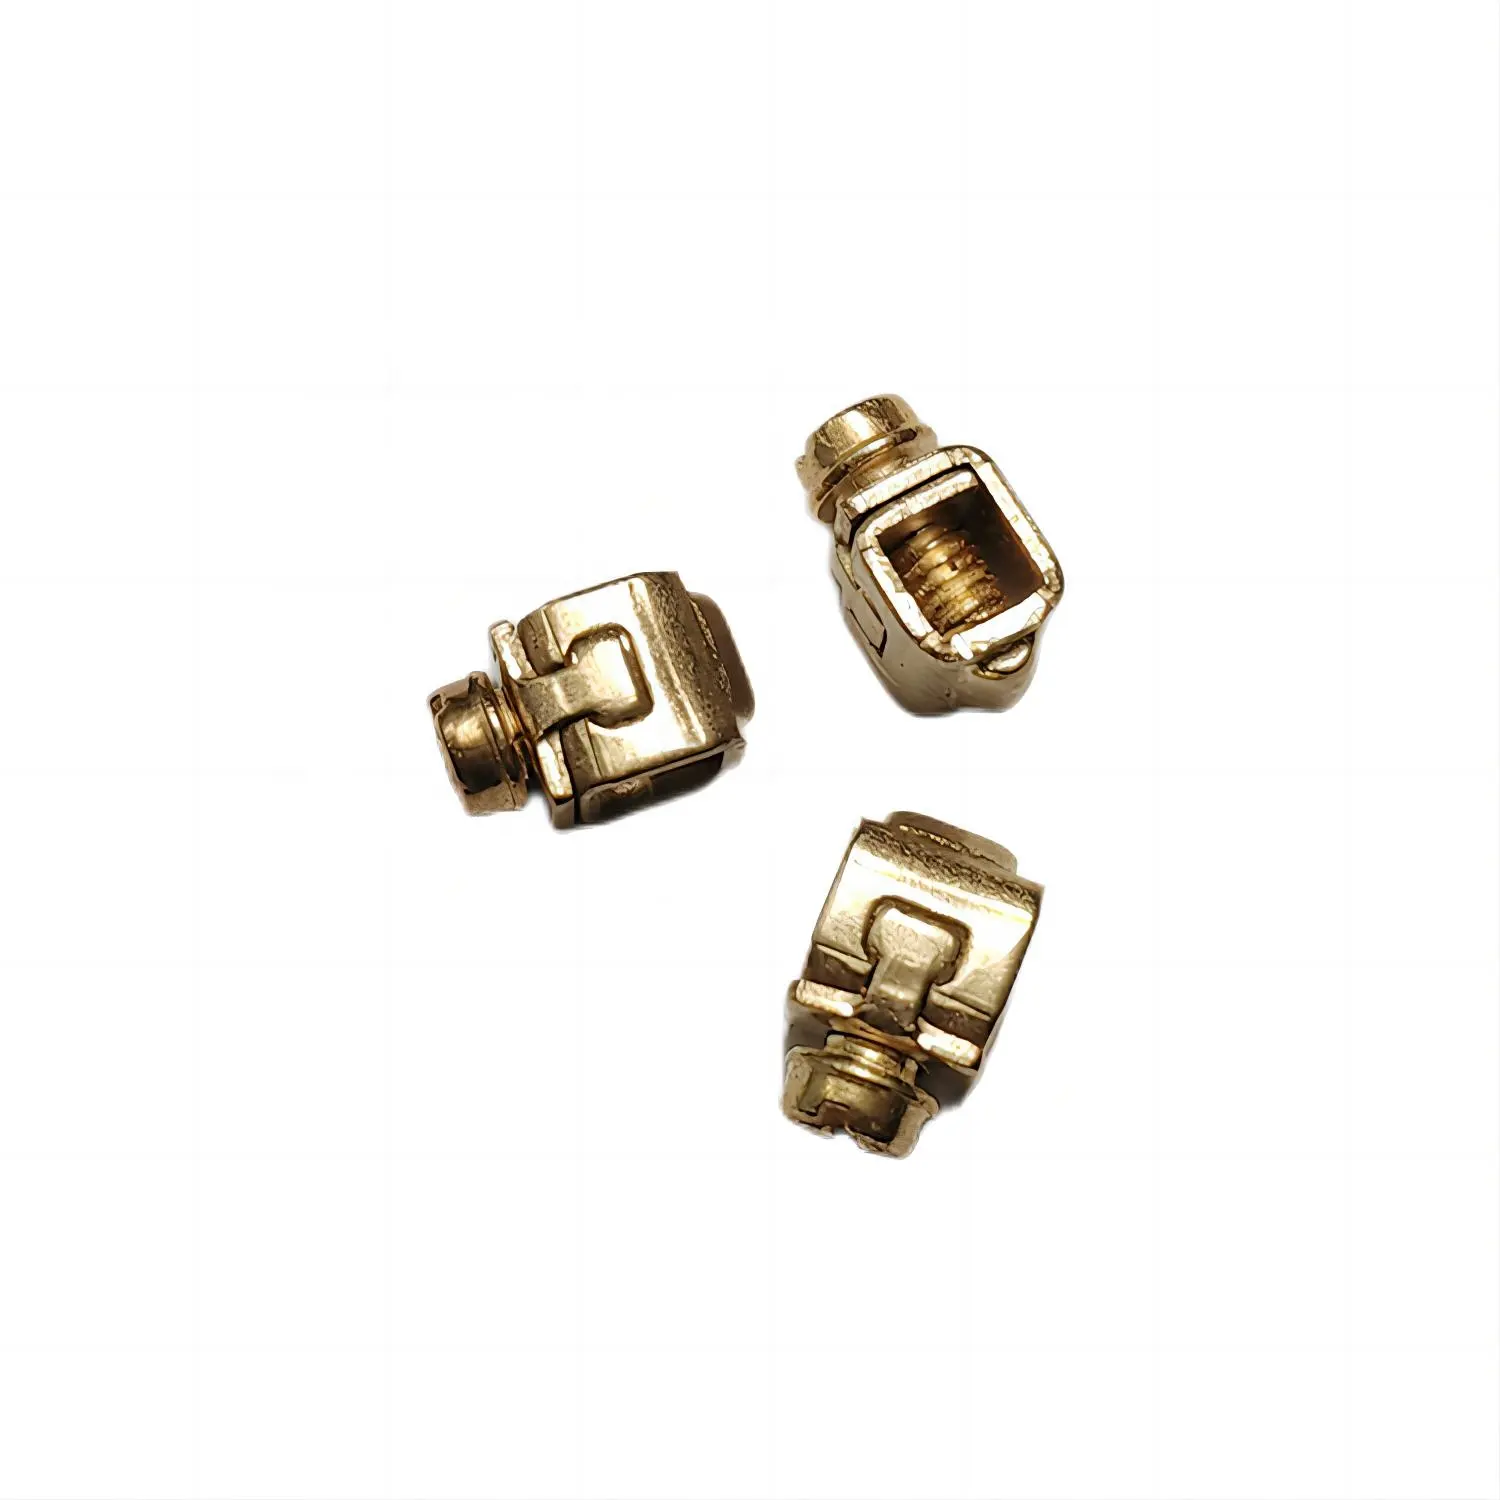 ZHANQ brass stamping electrical wire wiring terminal connectors for switch socket